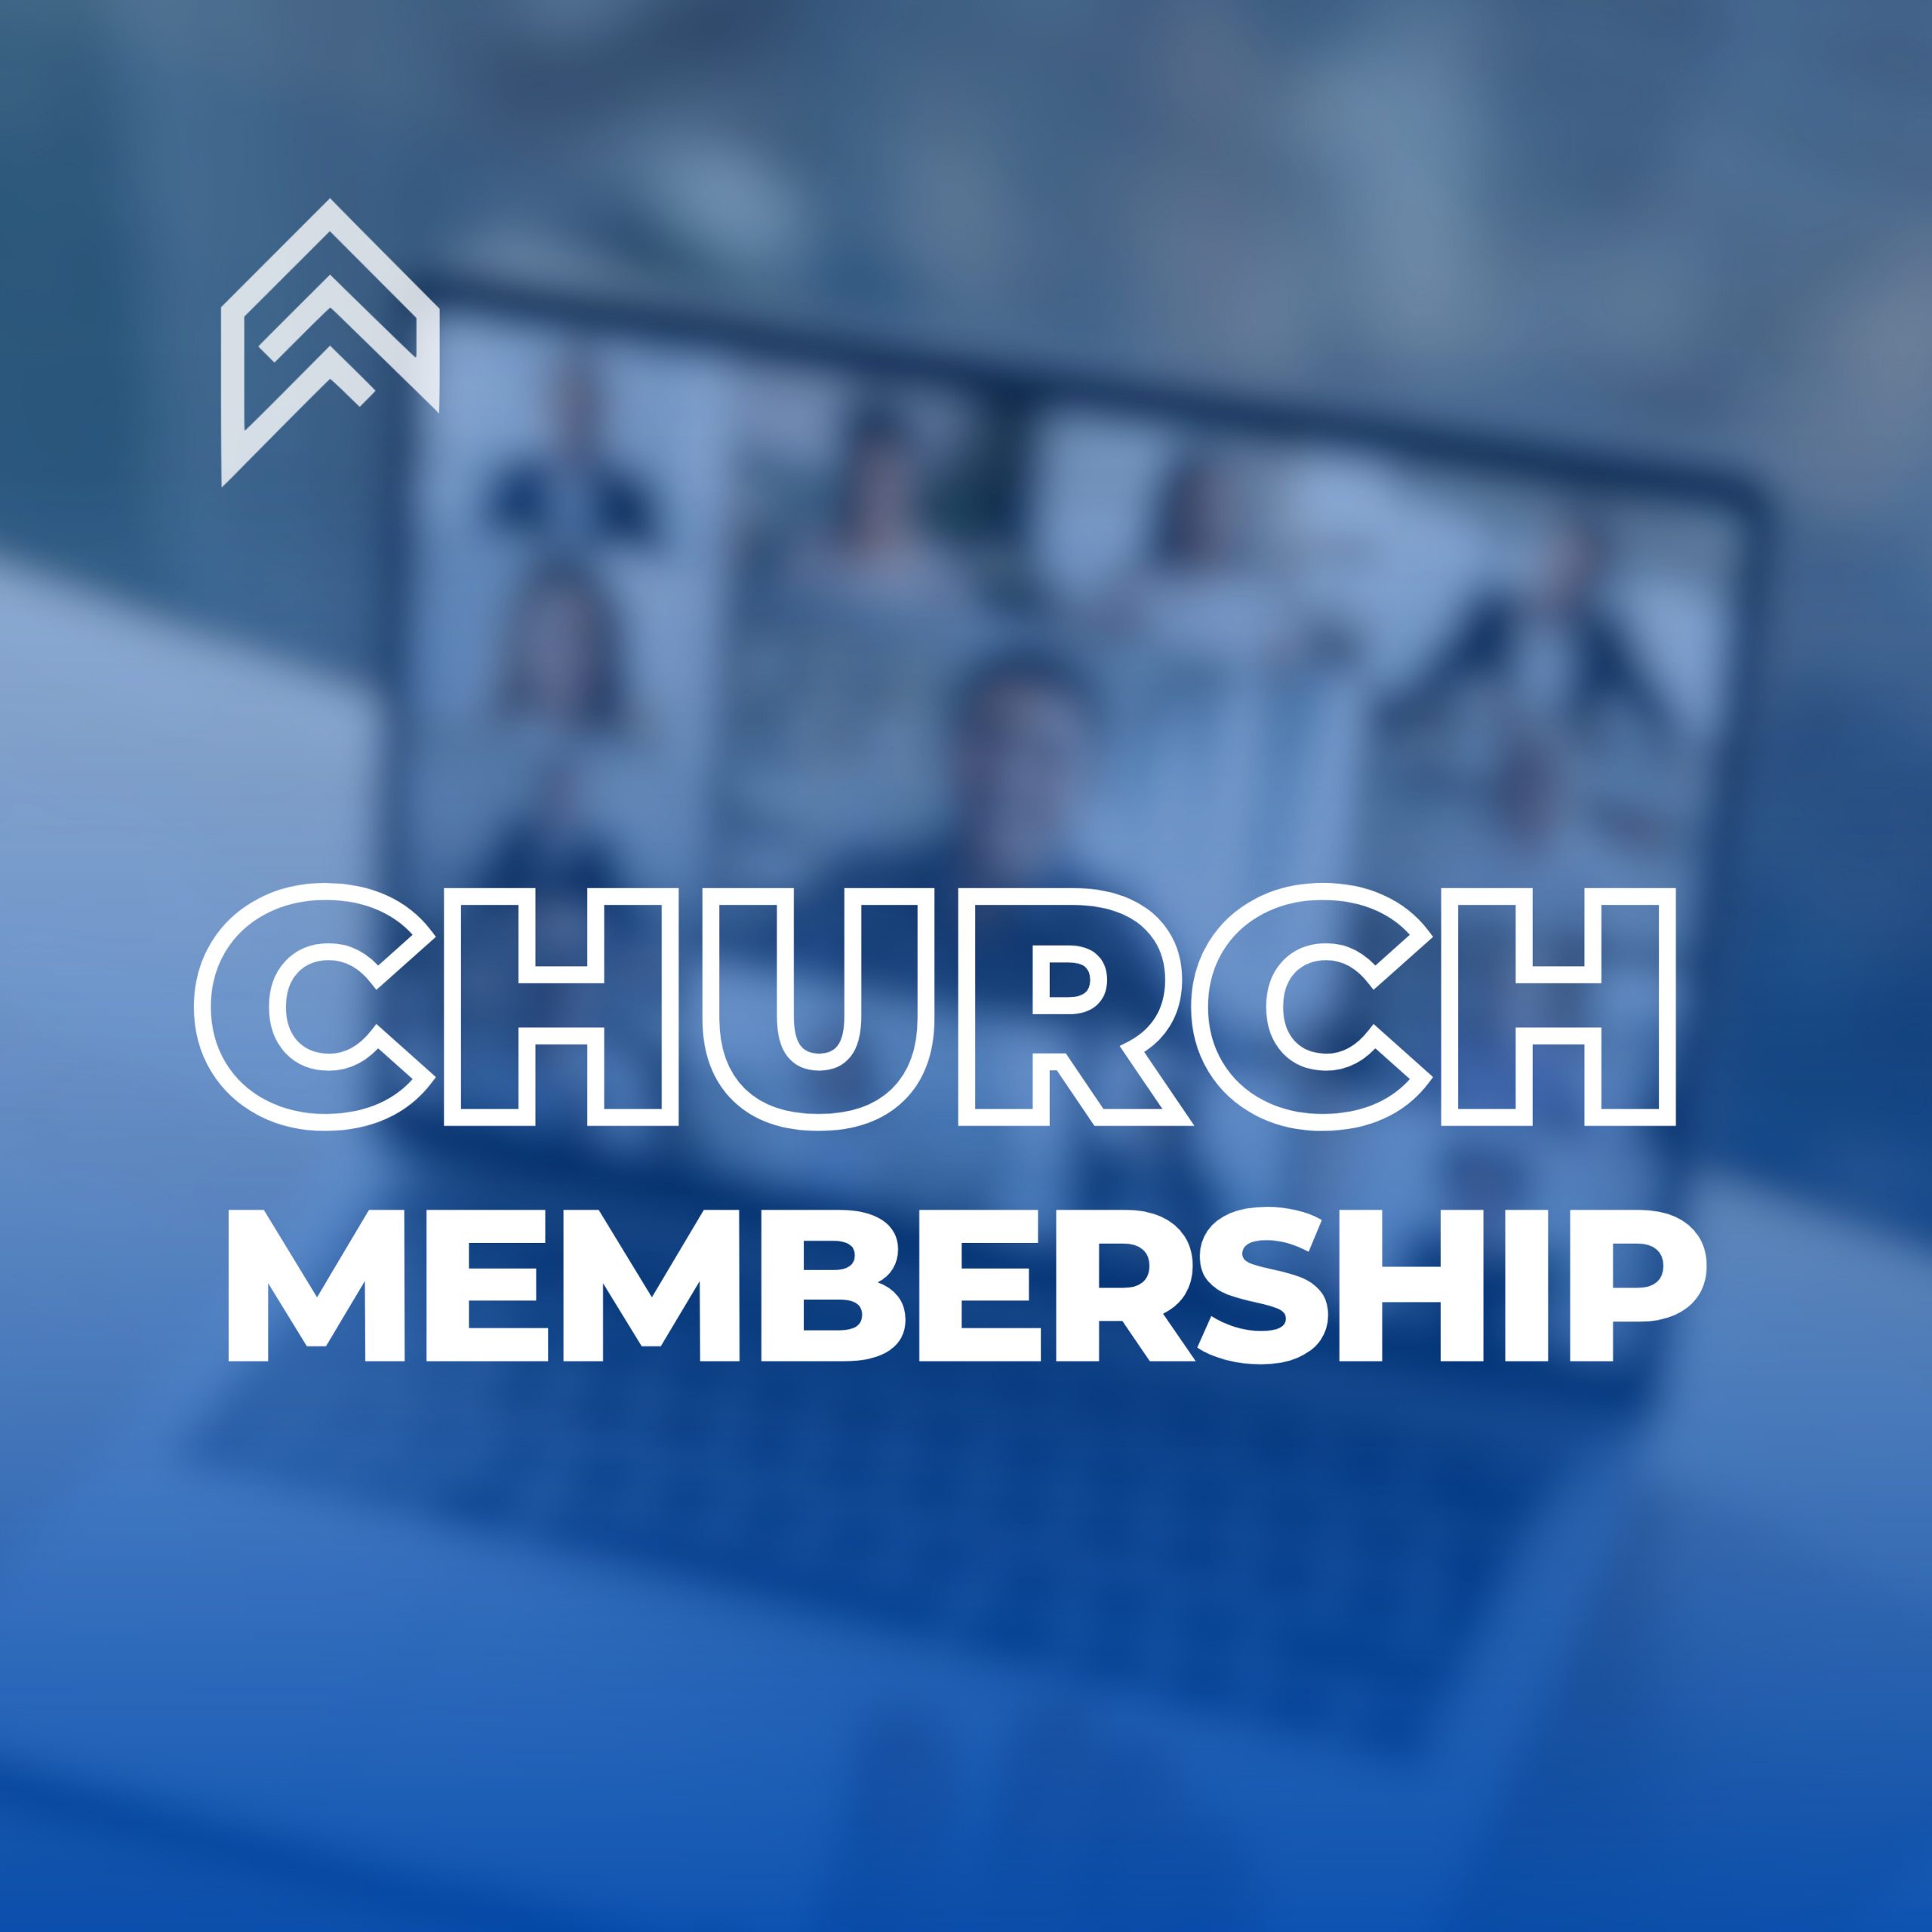 Adding Members to Your Church